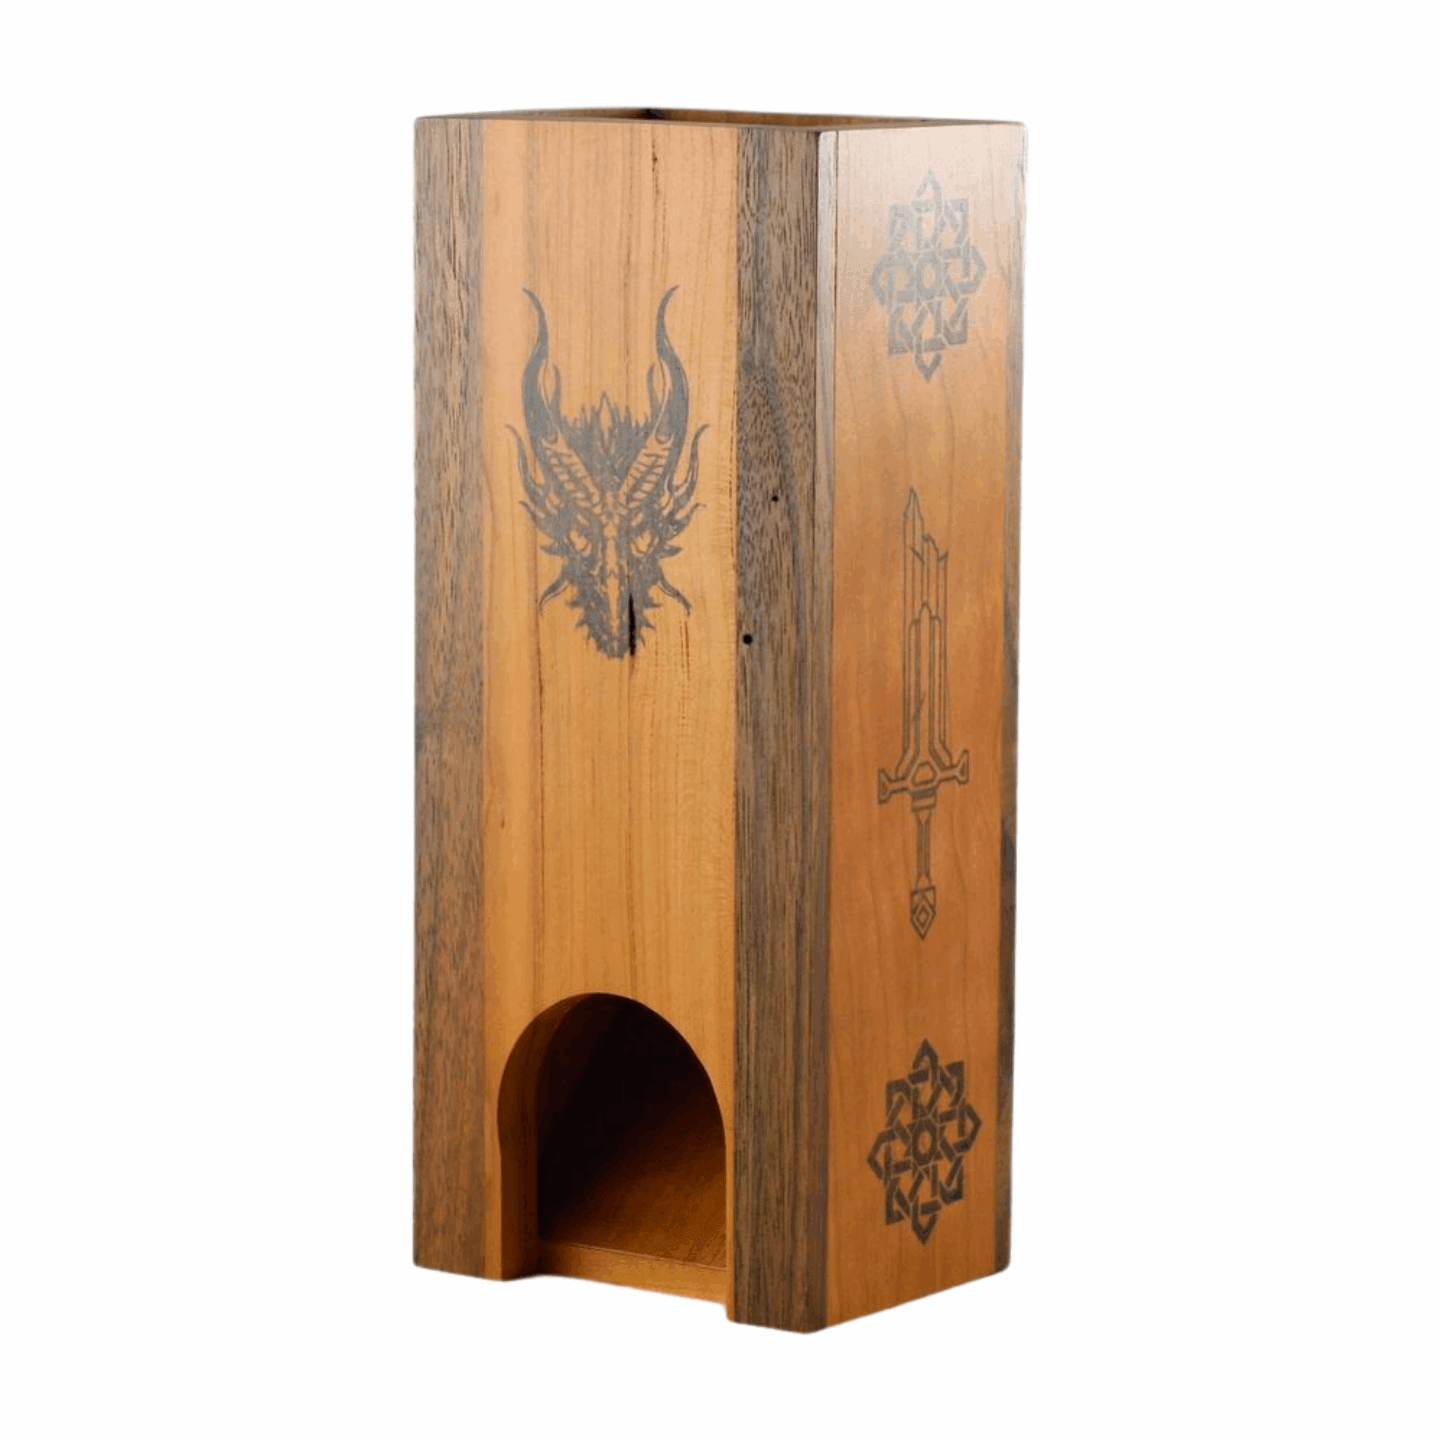 Cherry and Walnut Dice Tower with Dragon, Sword, and Knots Design - Dragon Armor Games